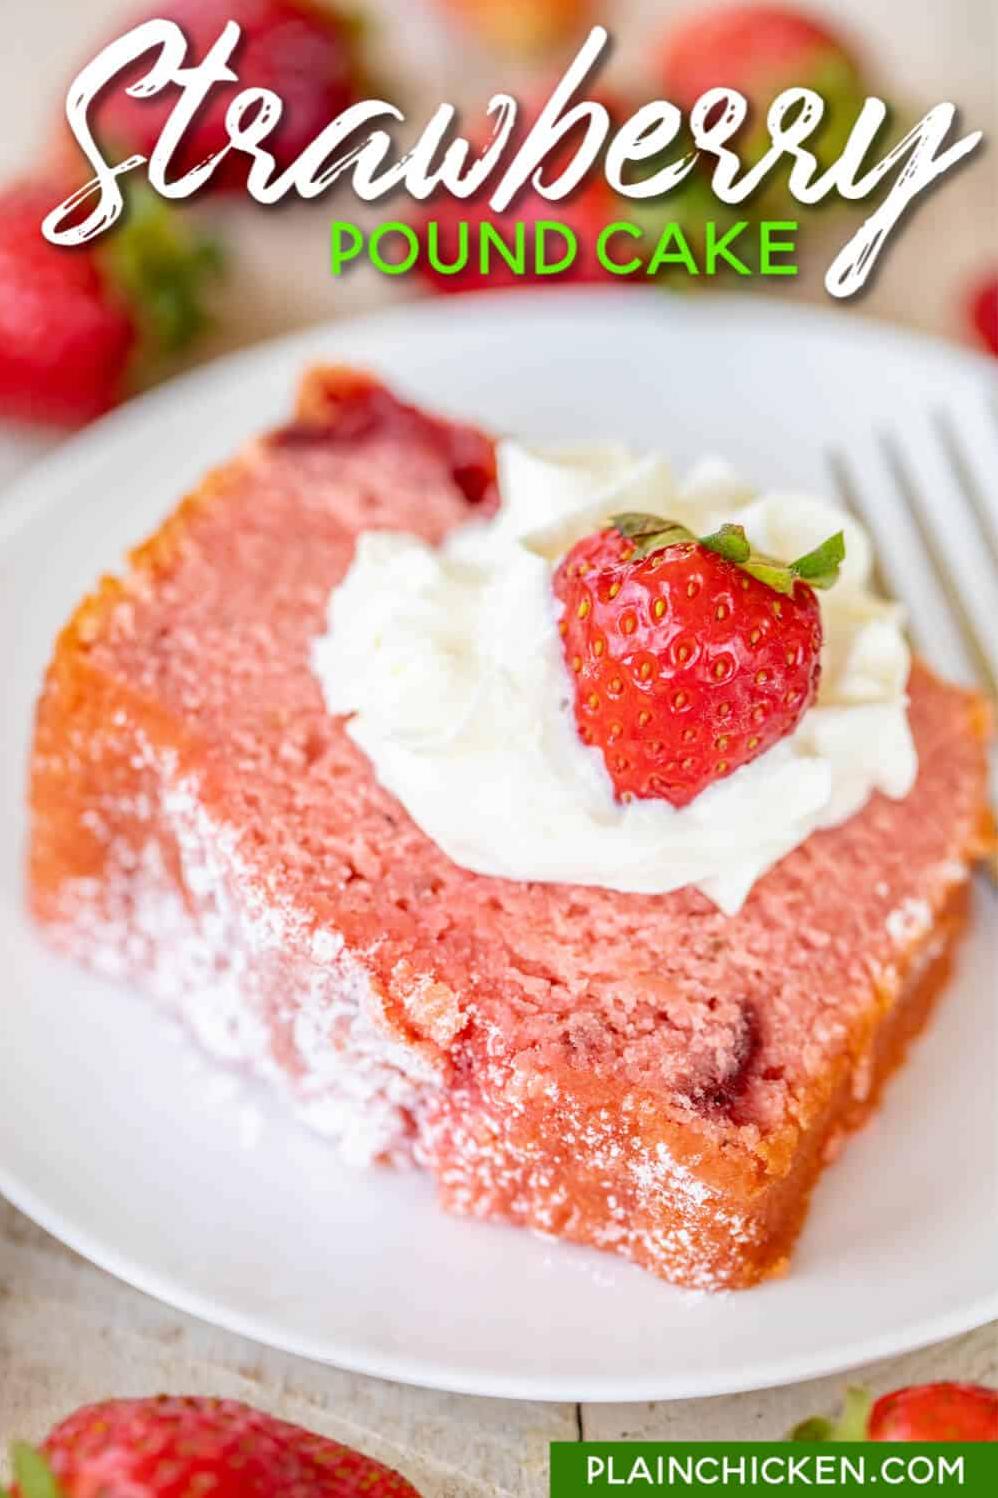  This pound cake is strawberries and cream in every bite.